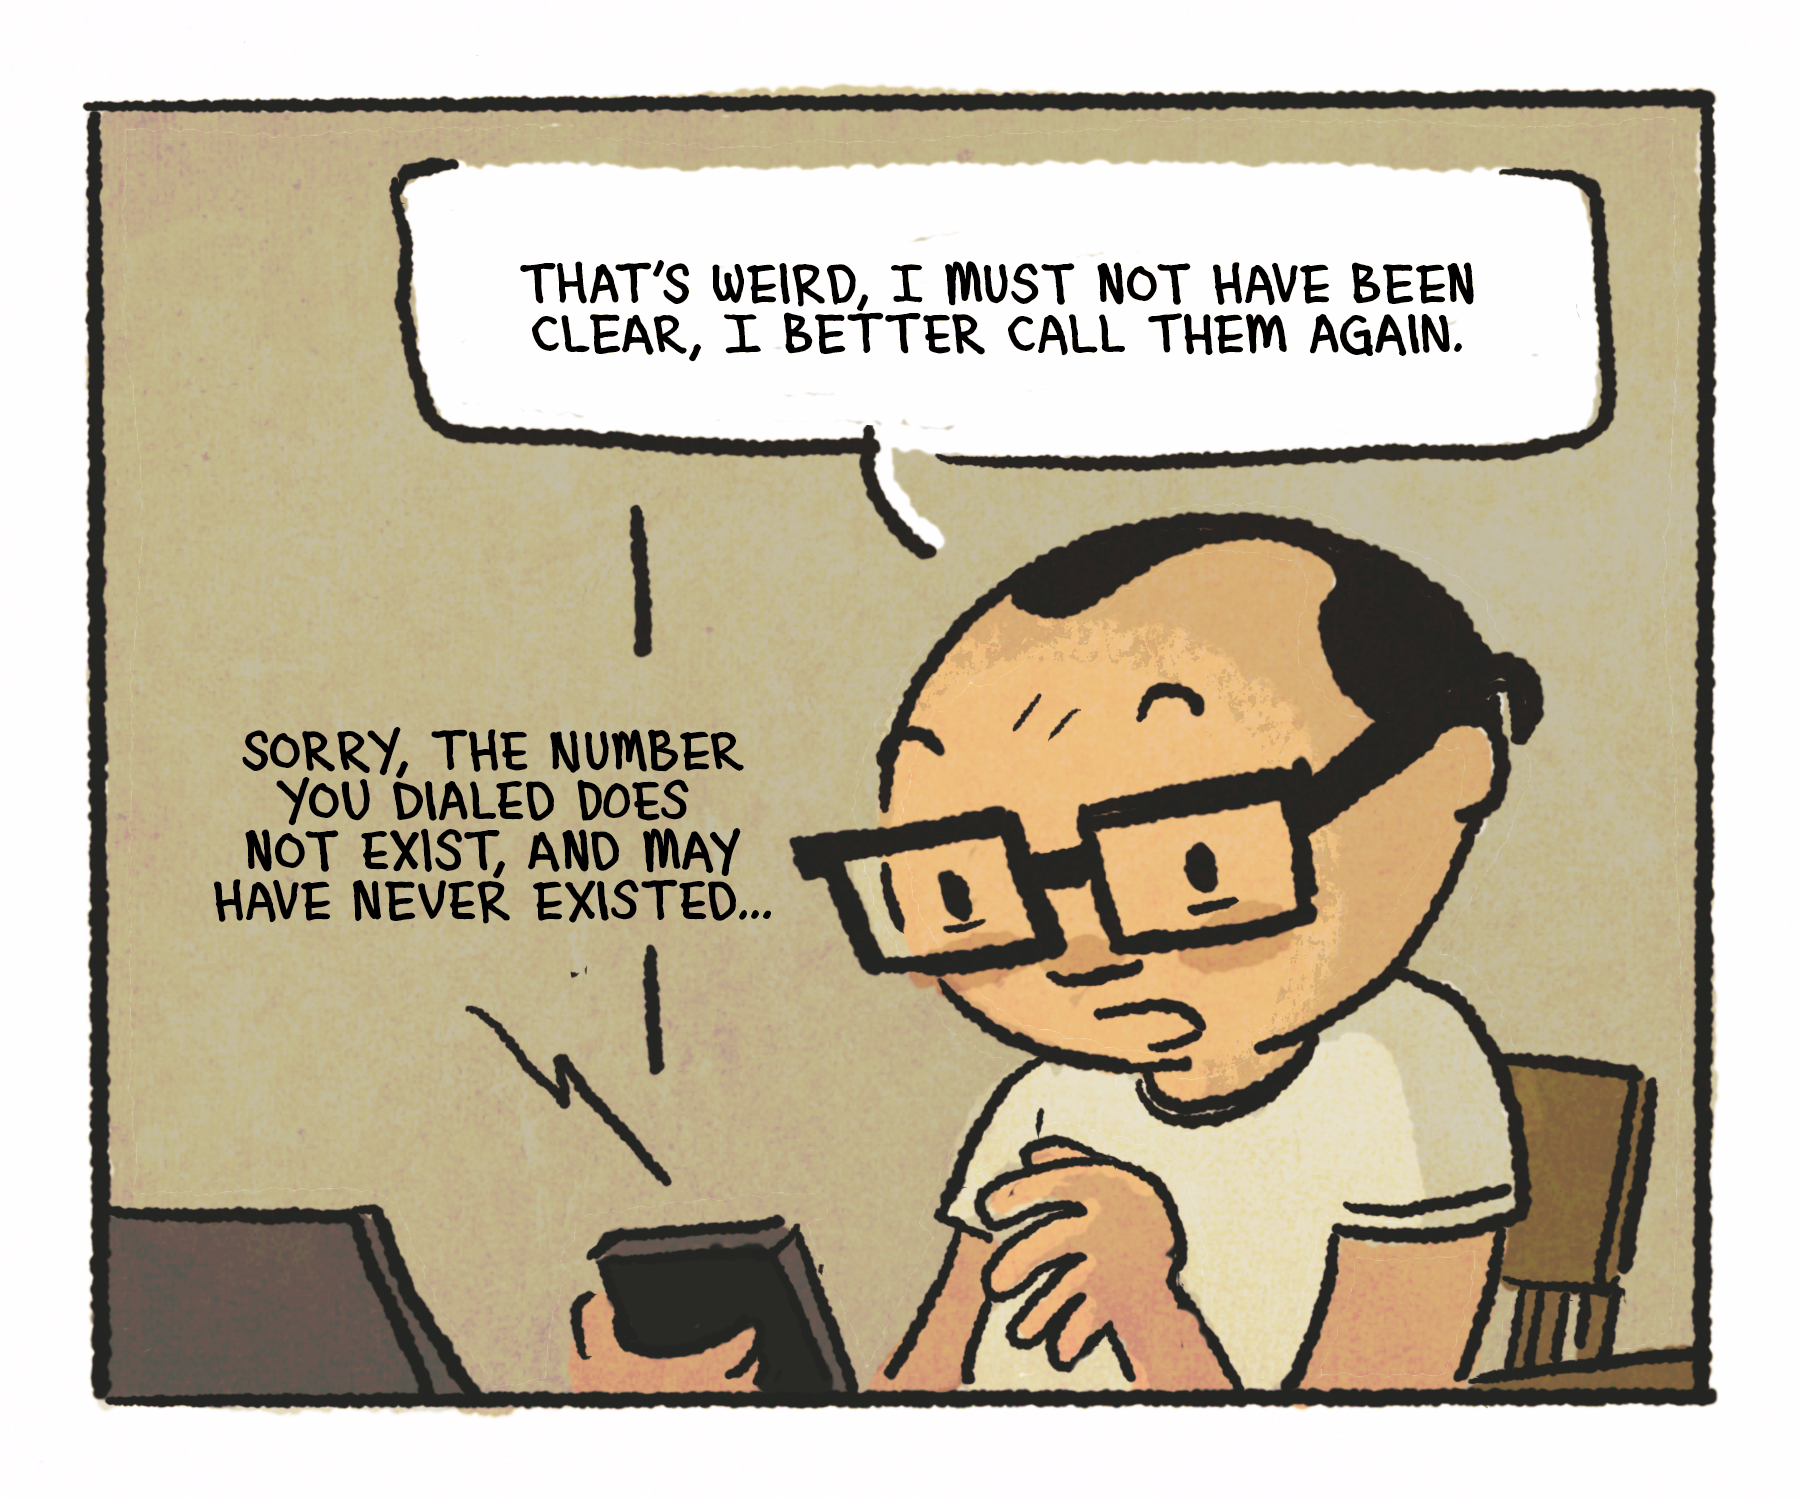 Comics panel: Man looks down at his phone, confused. Speech bubbles: "That's weird, I must not have been clear, I better call them again." "The number dialed does not exist, and may have never existed..."